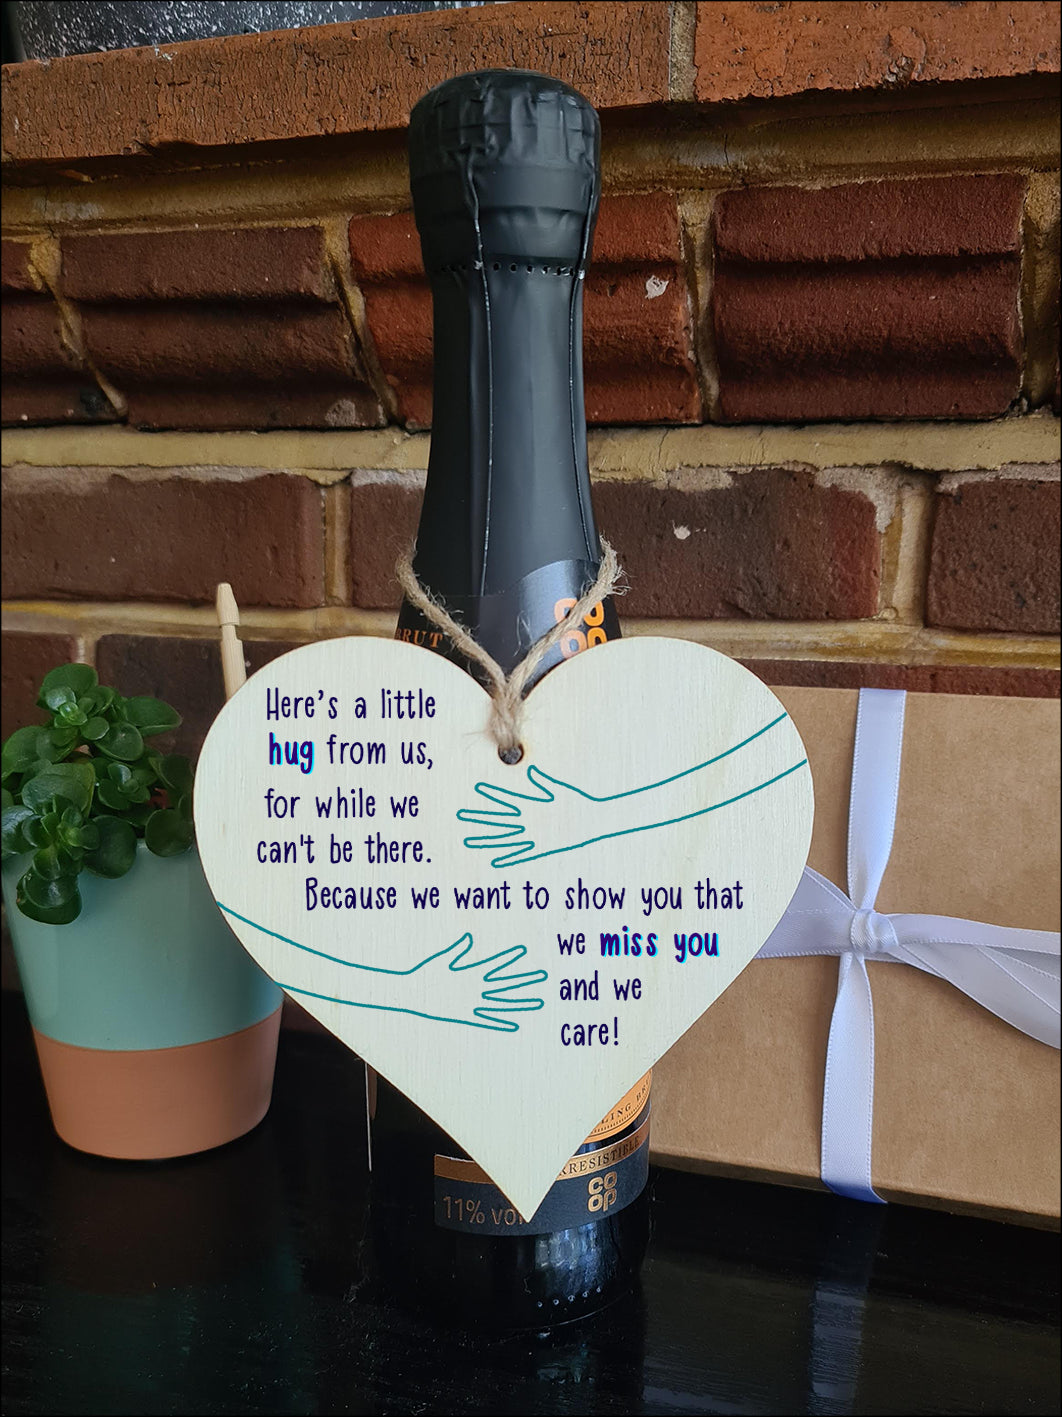 Handmade Wooden Hanging Heart Plaque Gift a little hug from us to show you we care miss you long distance wall hanger cute rainbow design for family friends grandparents